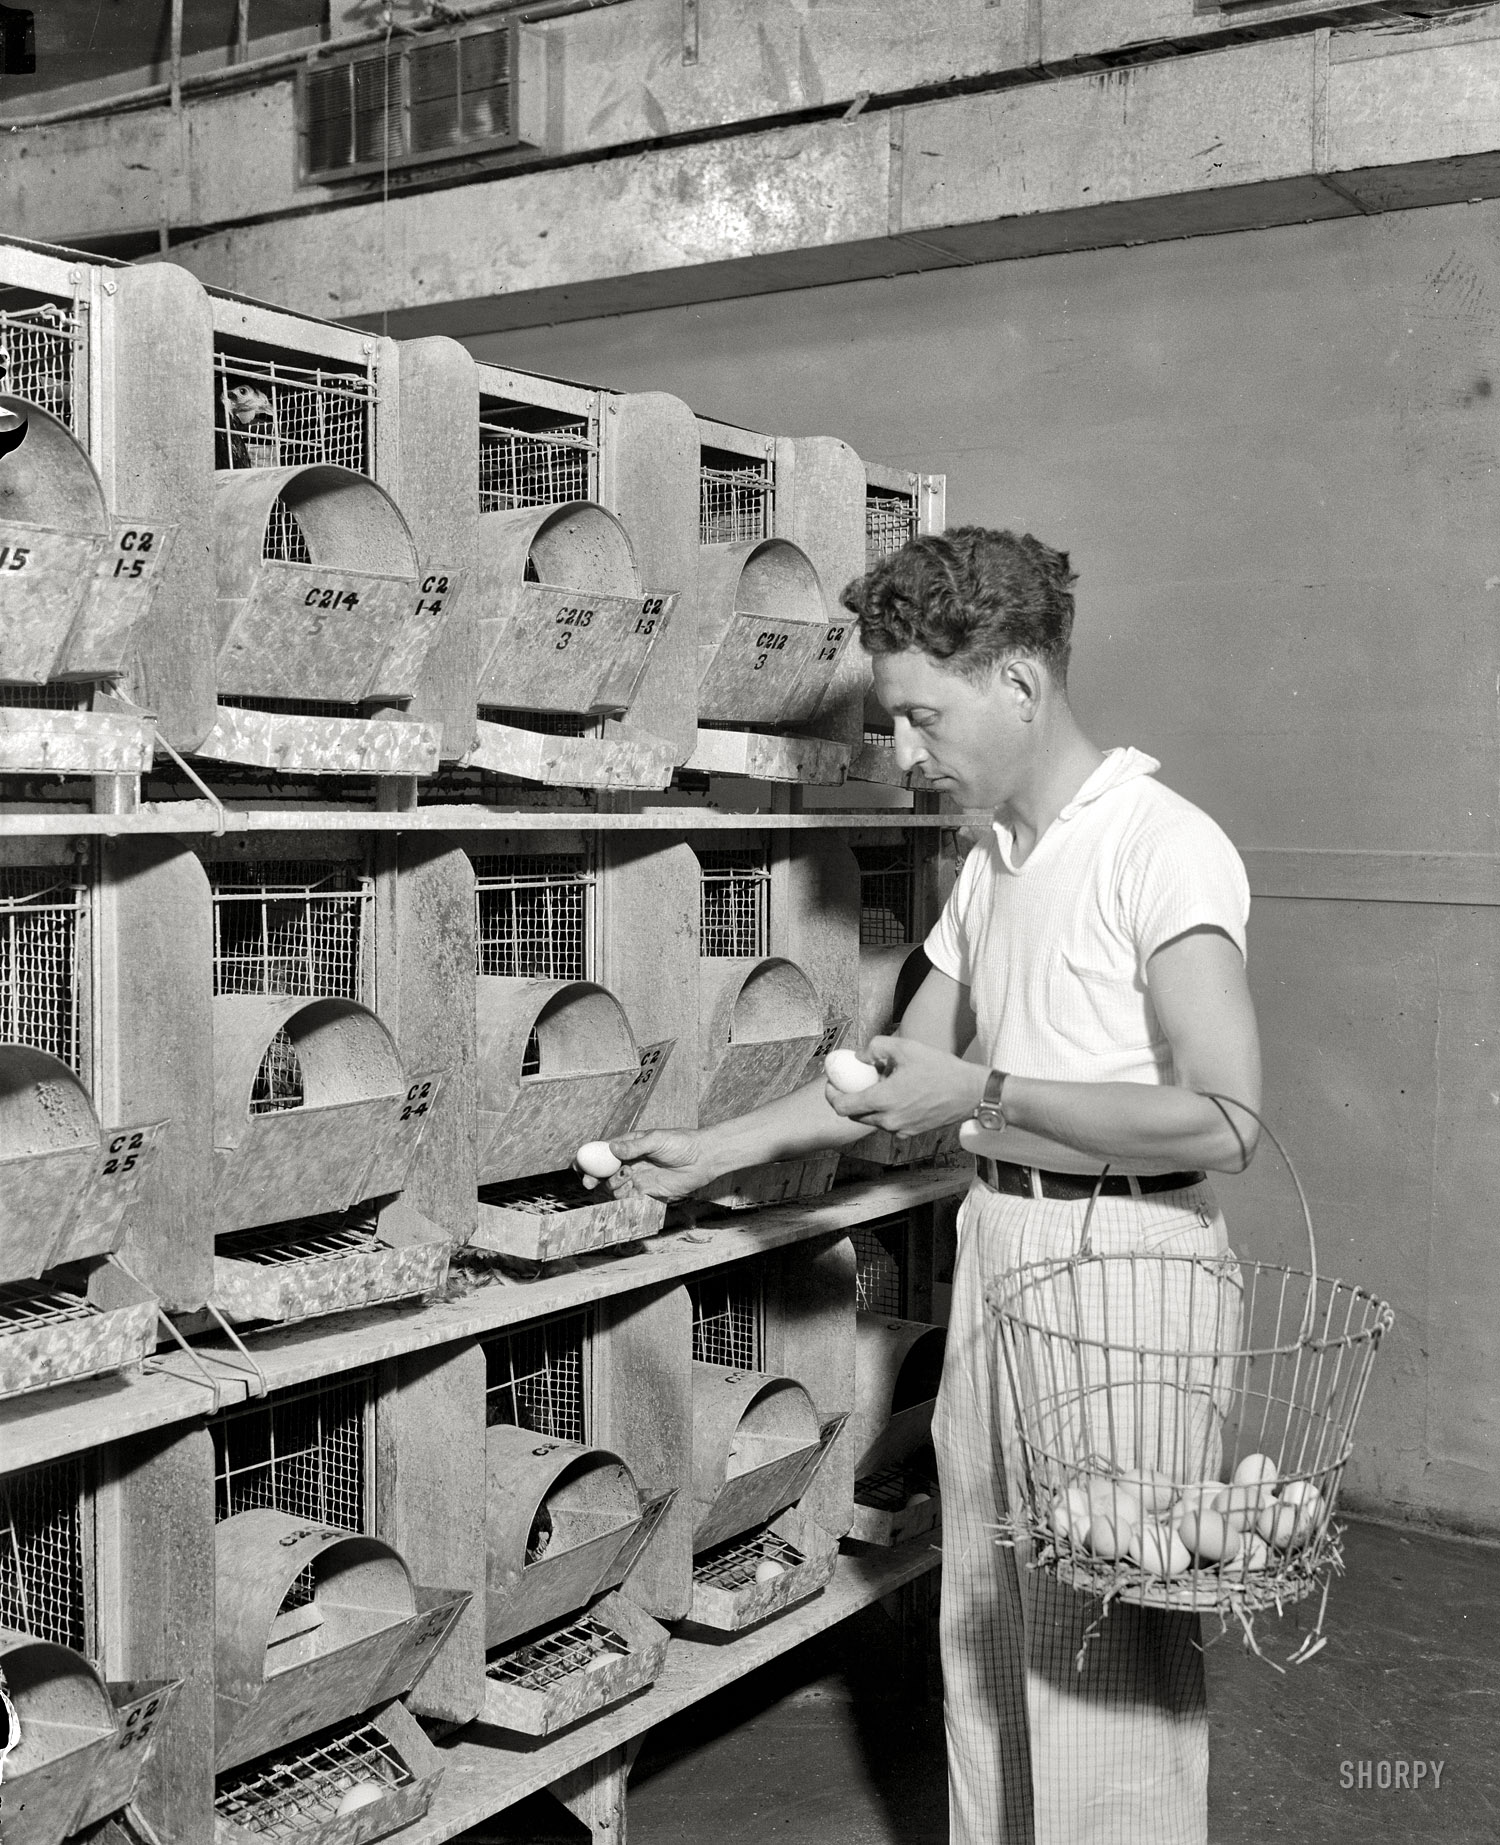 August 9, 1938. Washington, D.C. "Air conditioned hen house is latest. Biddy increases the production of eggs in an air-conditioned hen house, U.S. Department of Agriculture experts have discovered after extensive experiments. The first temperature controlled maternity ward for hens has just been put into operation at the governmental experimental farm here. The hens have voiced their approval by laying more frequently; also a more uniform egg. R.B. Nestler, poultry expert, is pictured as he removes the eggs from the automatic chute in the new room. Note the air conditioning apparatus on the ceiling." So this poultry man with the wonderful name of Nestler is, contrary to USDA Best Practices, putting all his eggs in one basket. Harris & Ewing glass negative. View full size.